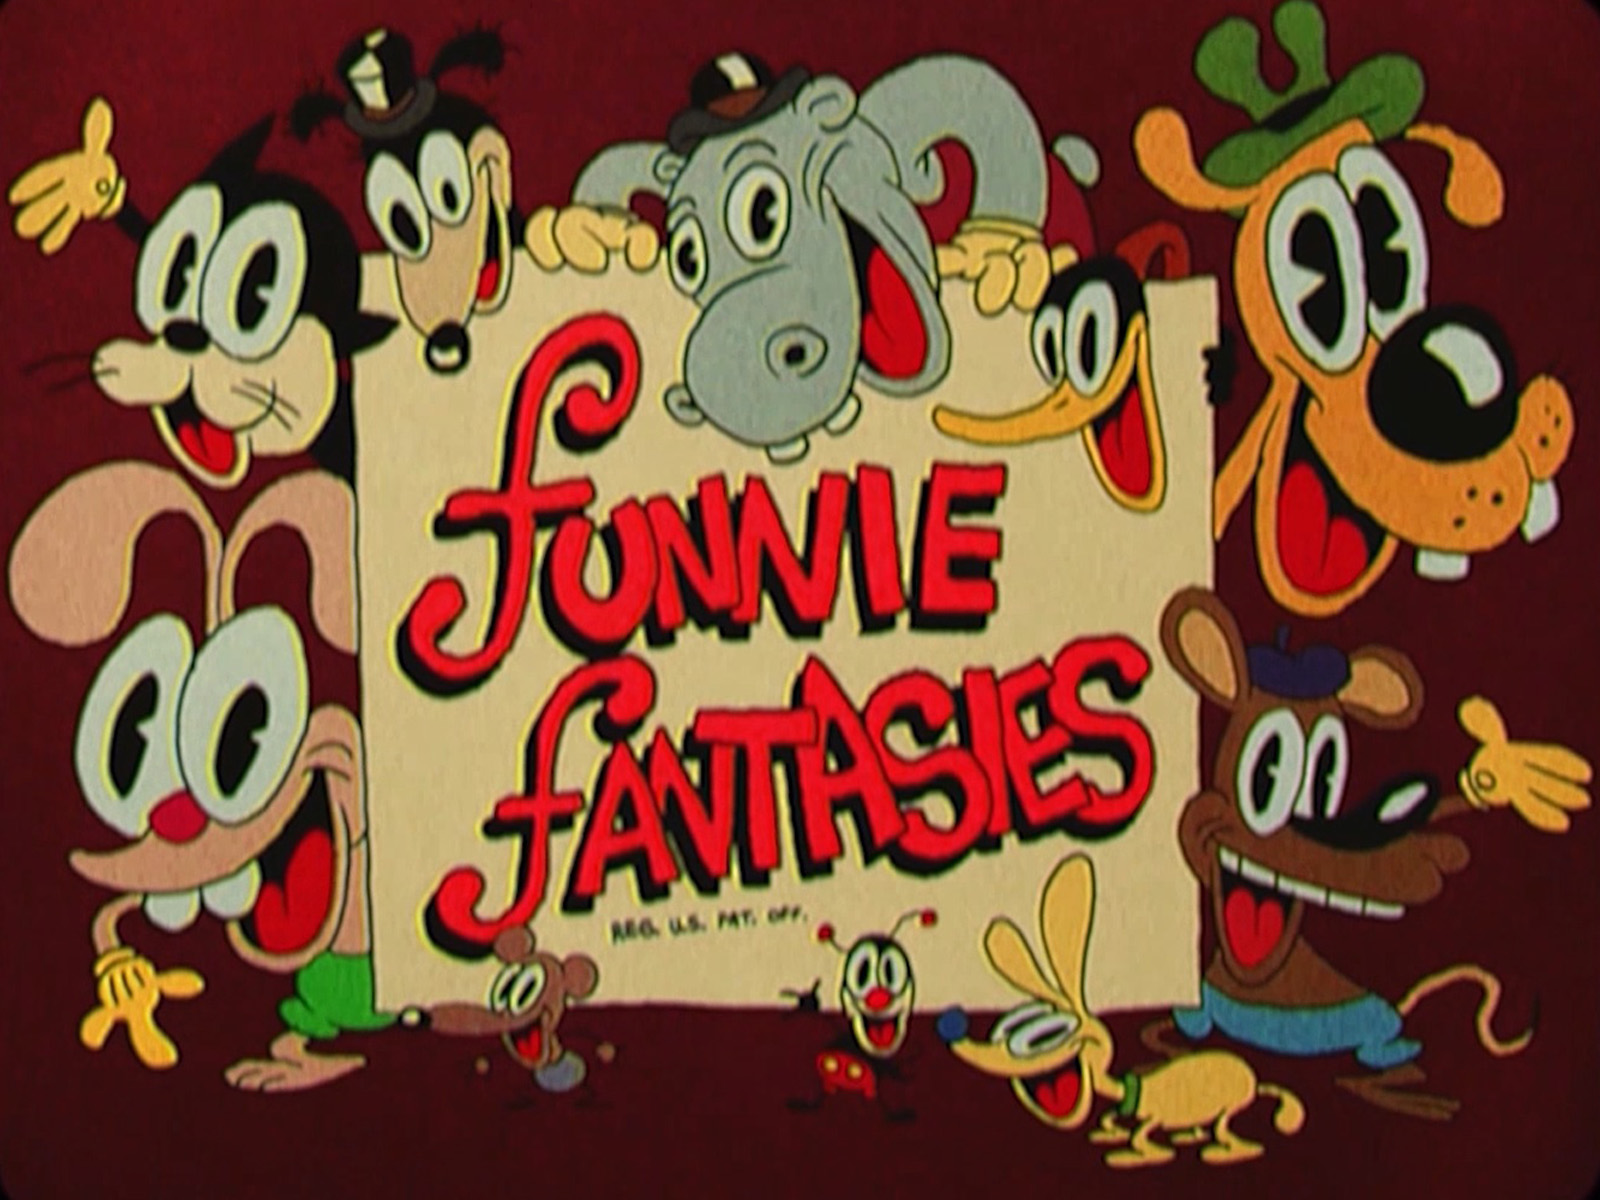 An intro title screen with the words "funnie fantasies" surrounded by various animal characters